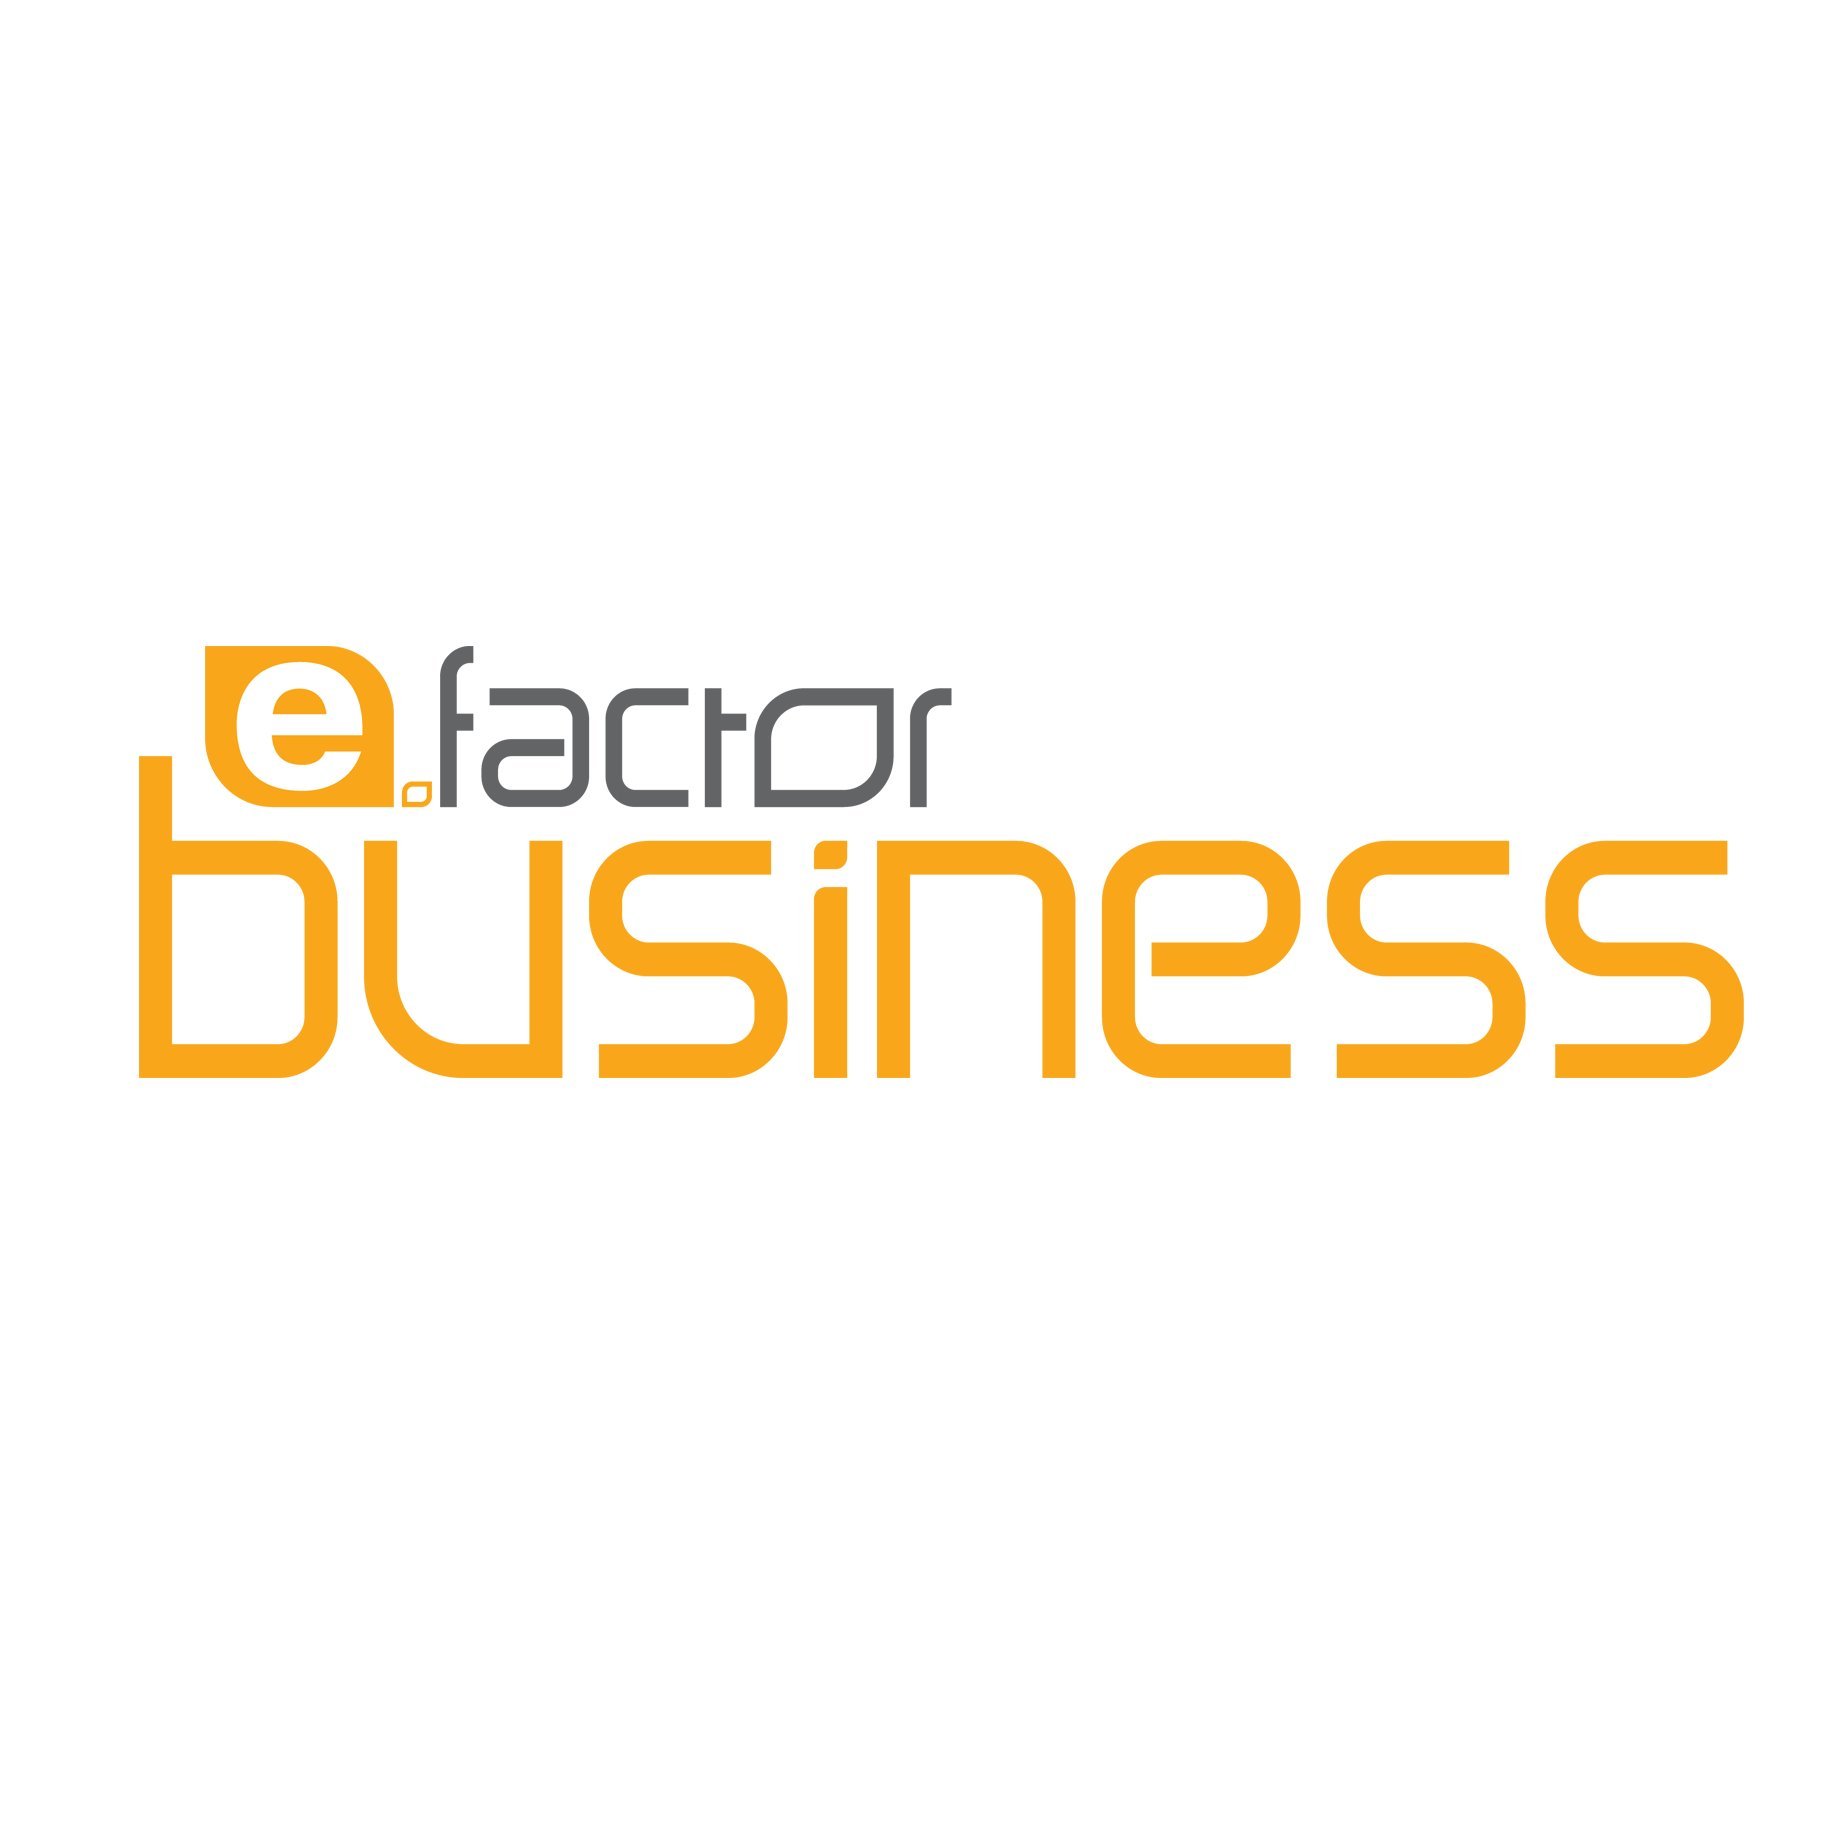 E-Factor Business is a Social Enterprise that is dedicated to helping businesses of all sizes reach their potential through 1-to-1 tailored support.